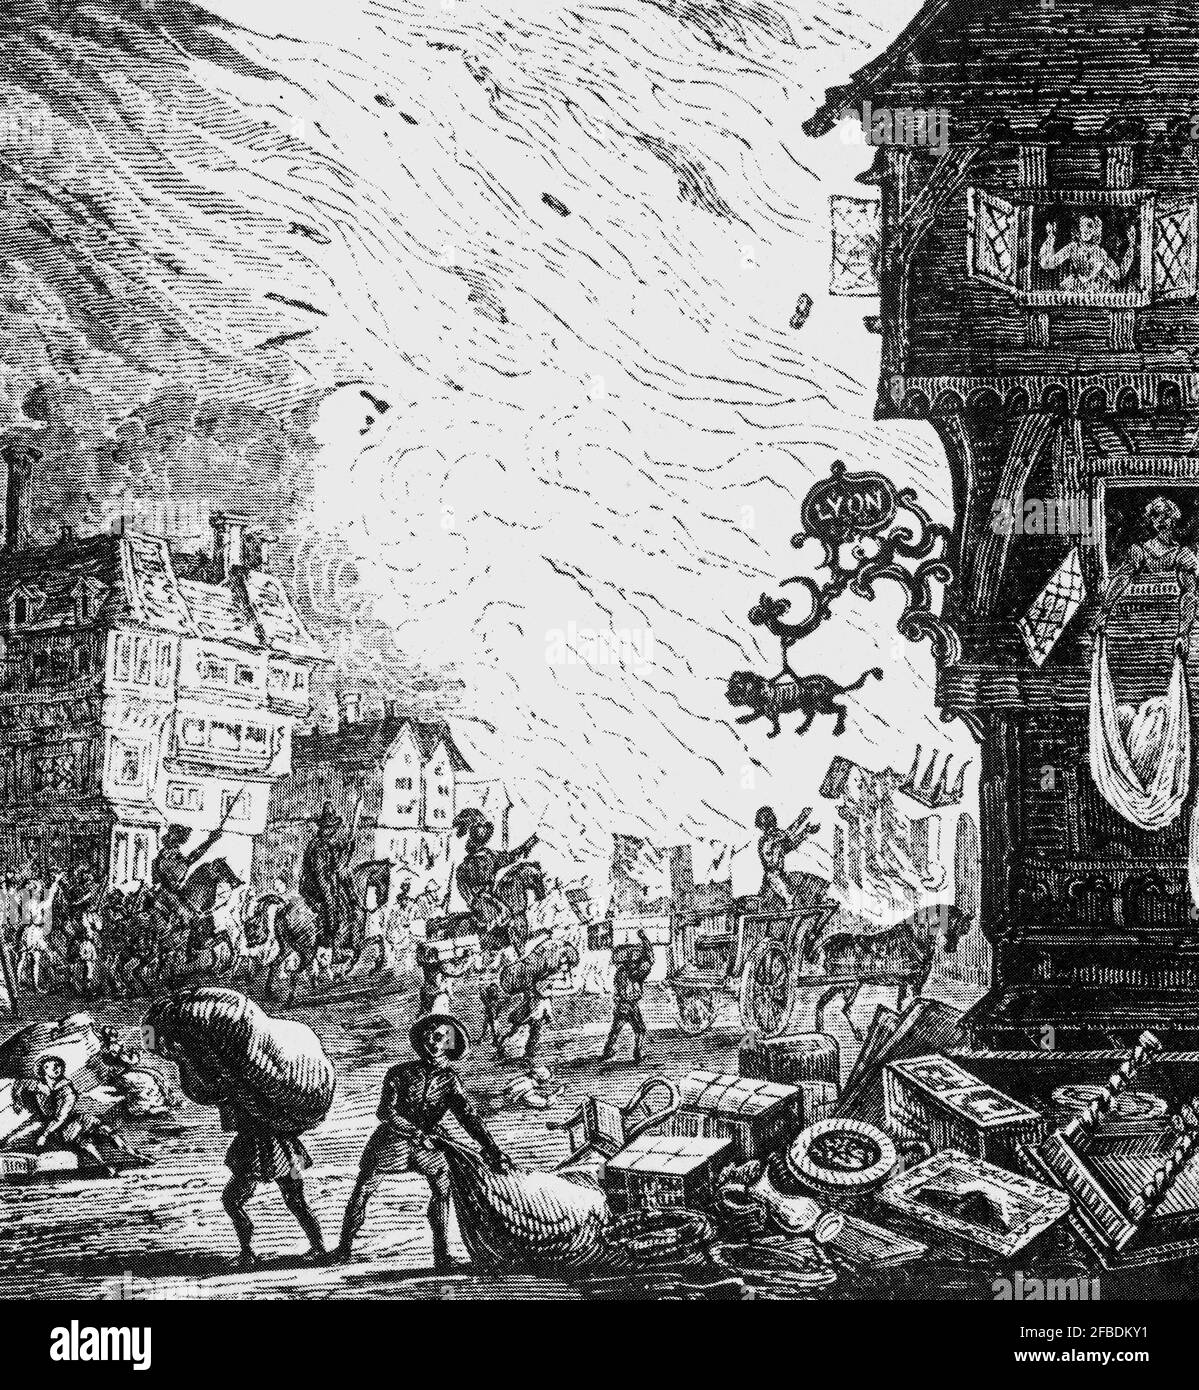 A scene from the Great Fire of London, a major conflagration that swept through the central parts of London from Sunday, 2 September to Thursday, 6 September 1666.The fire gutted the medieval City of London inside the old Roman city wall. It destroyed 13,200 houses, 87 parish churches, St Paul's Cathedral, and most of the buildings of the City authorities. Stock Photo